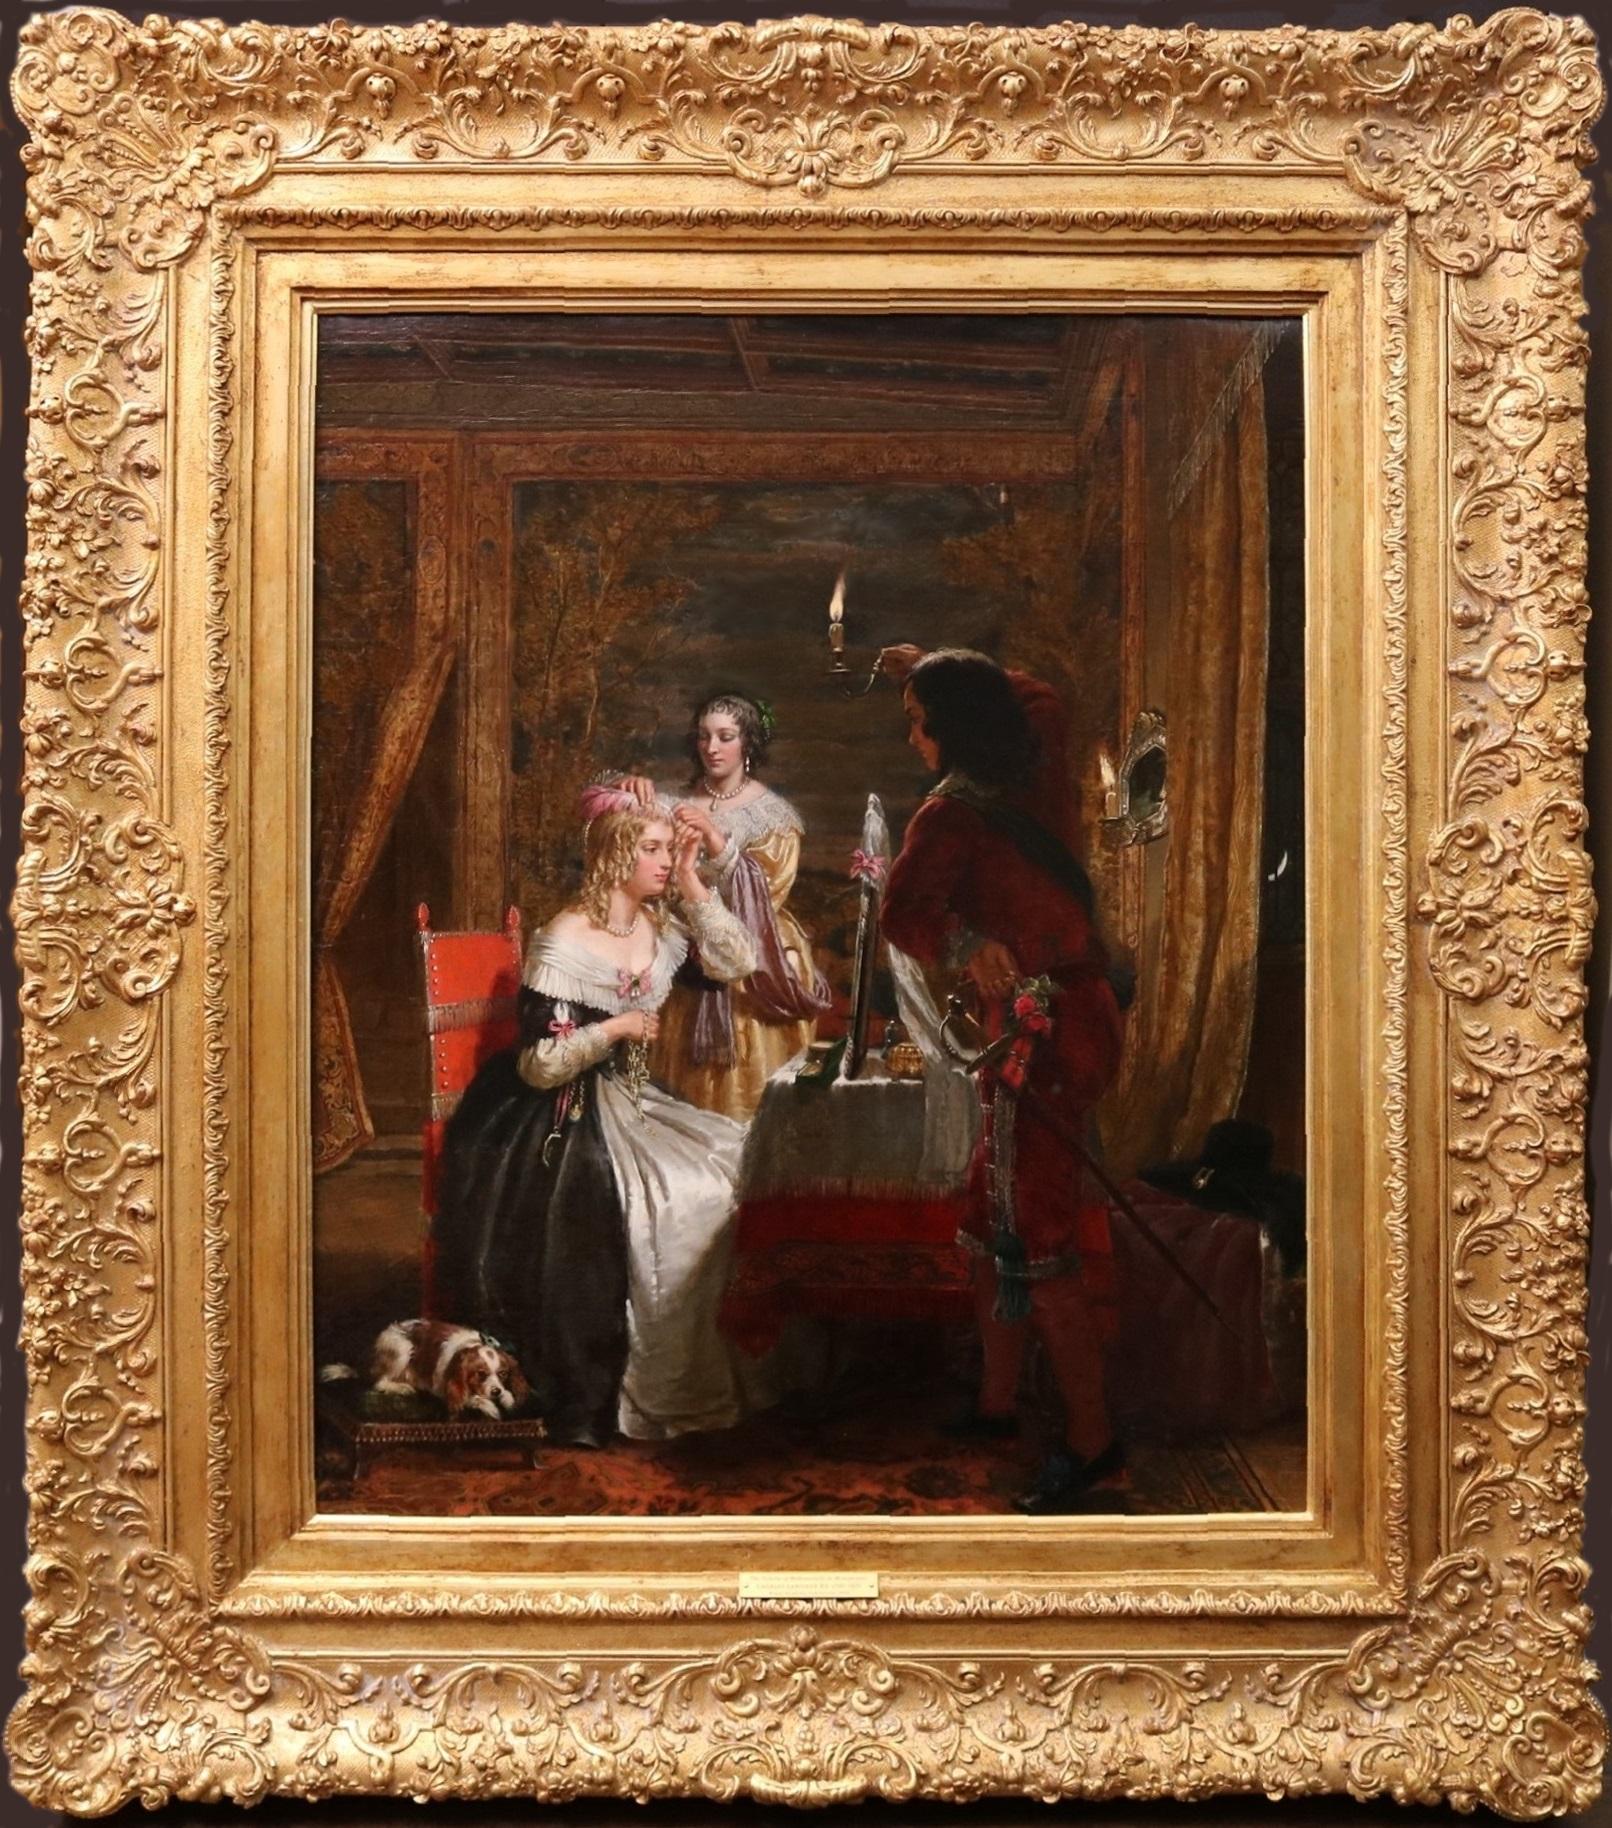 Charles Landseer RA Portrait Painting - Royal Academy Oil Painting of Charles II and Beauties of French Court Versailles